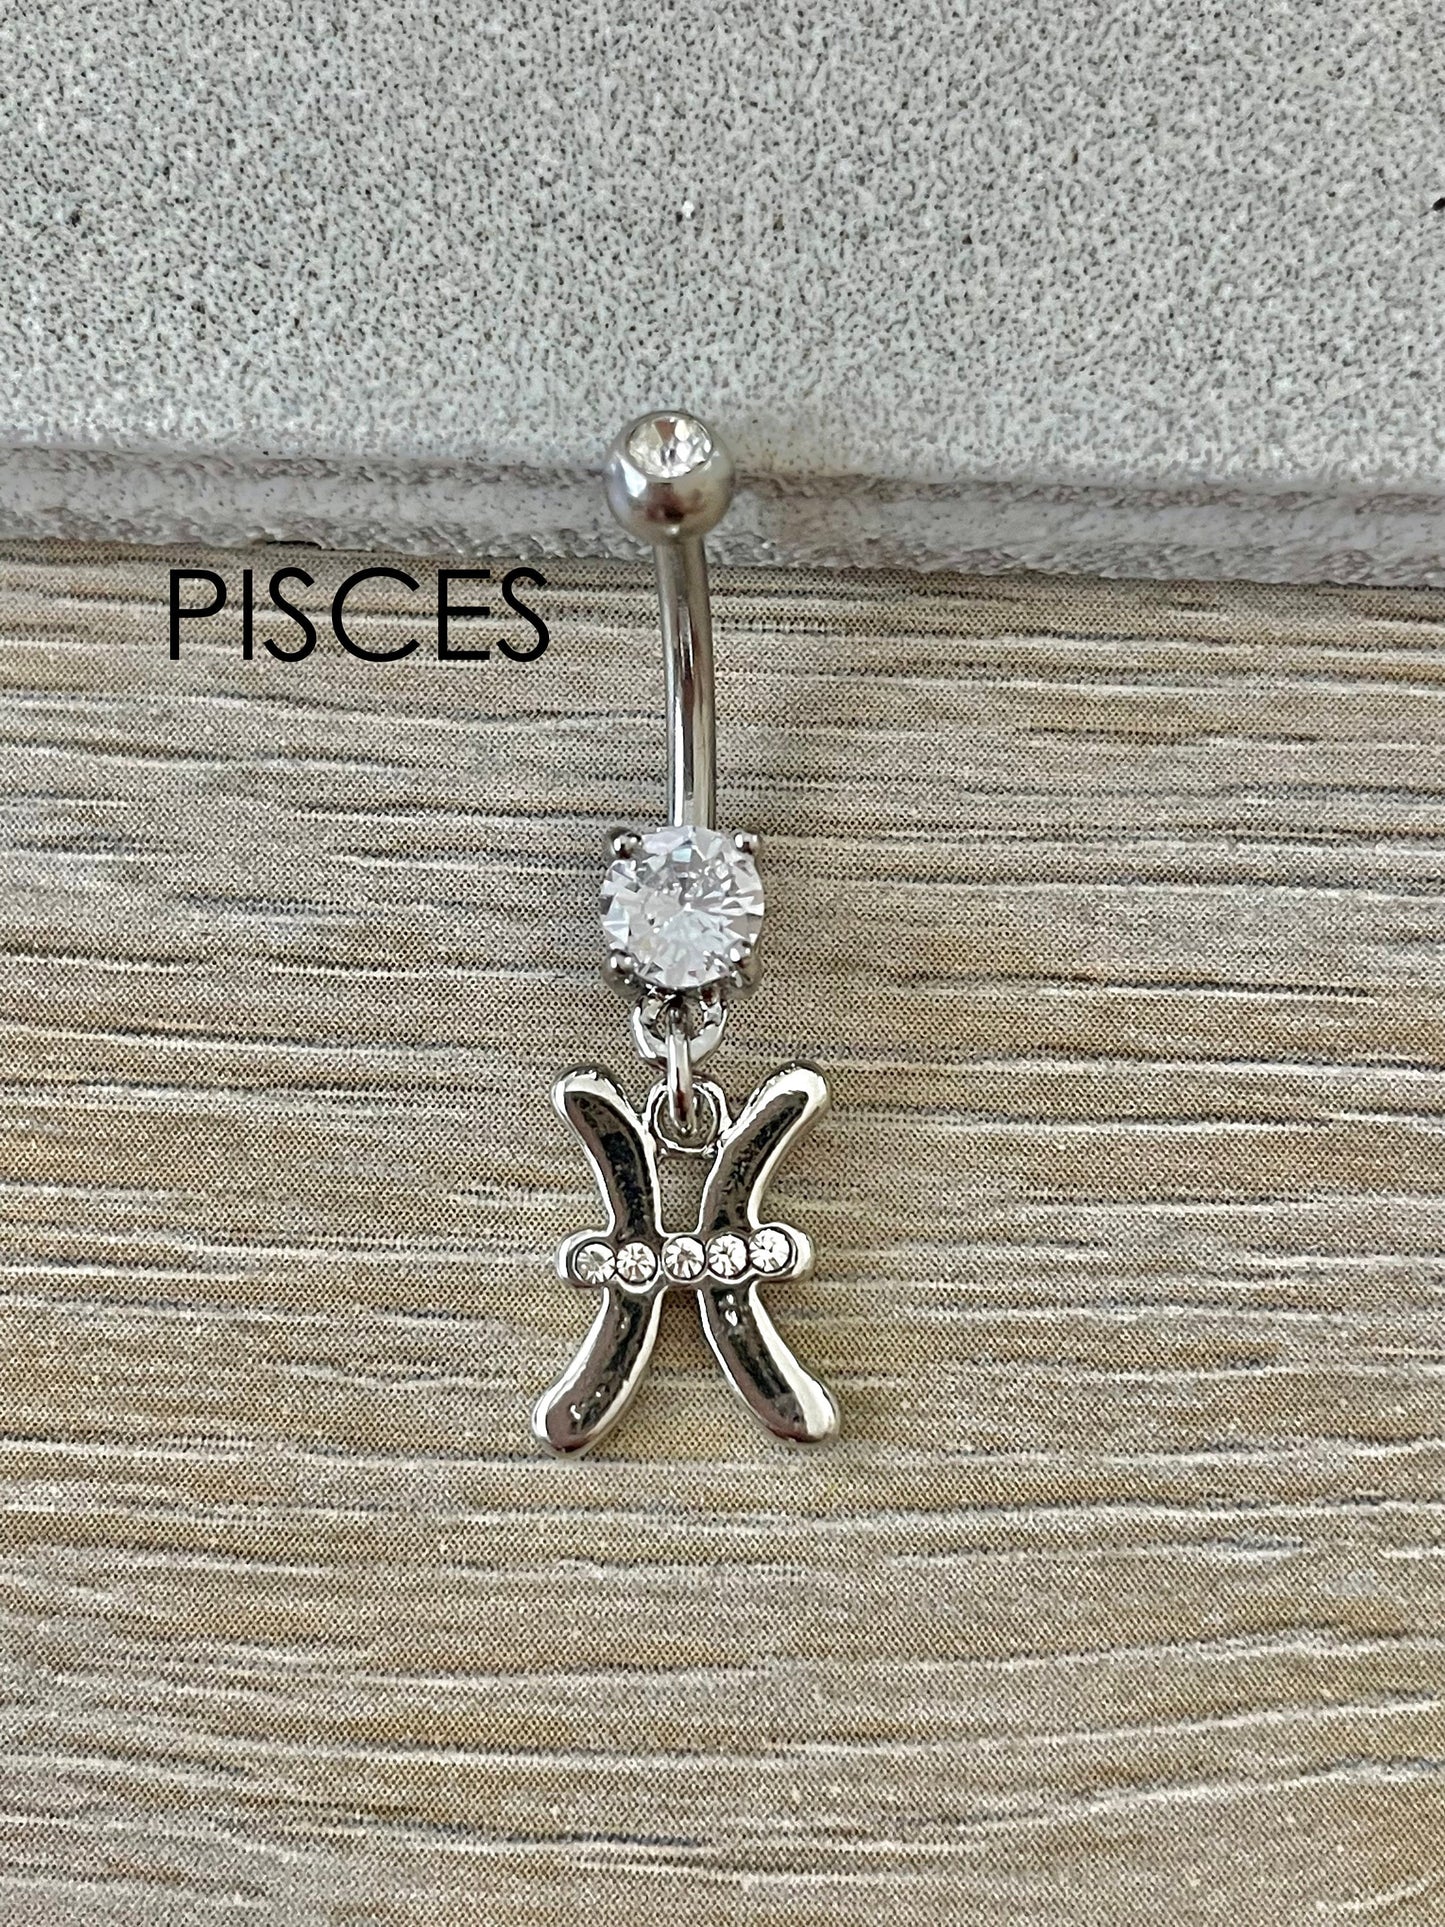 Silver Aquarius Belly Button Ring (14G | 10mm | Surgical Steel)